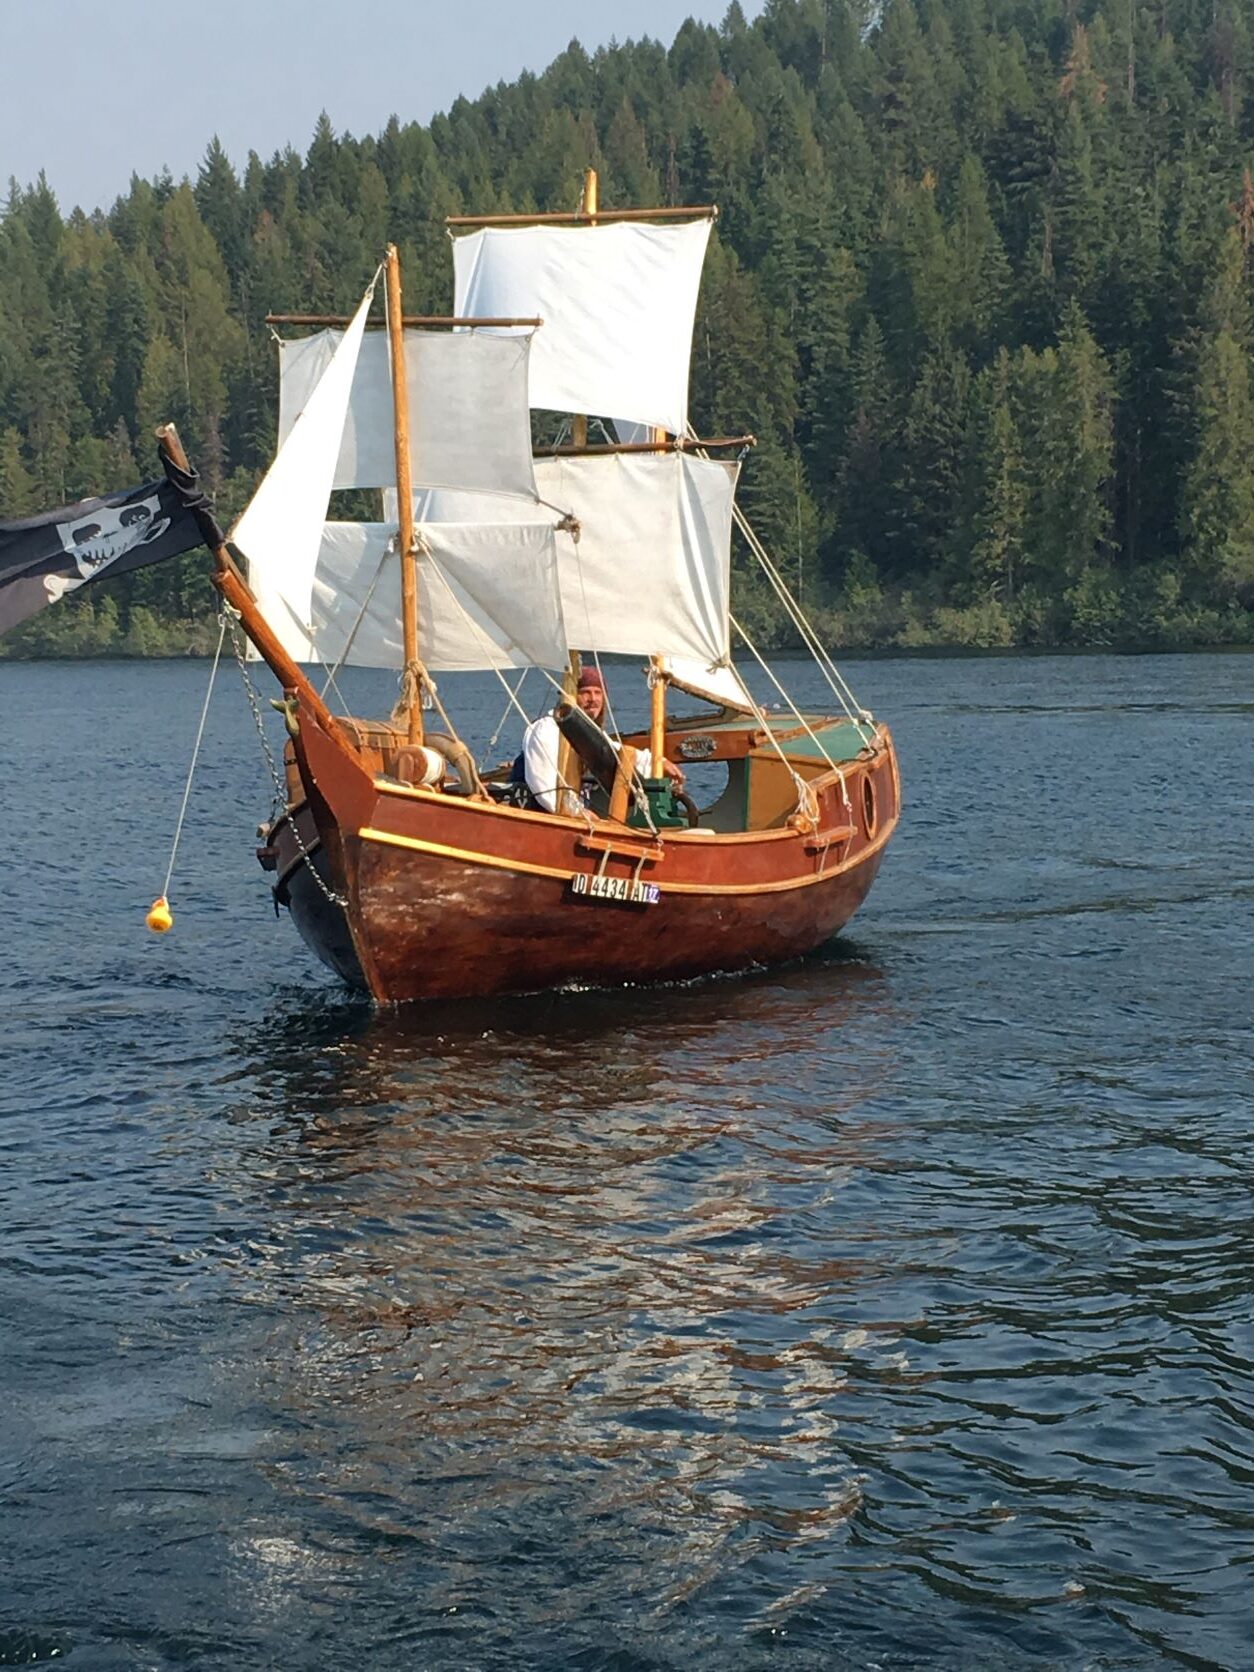 Pirate boat on Lake Pend Oreille, with white sails and wooden hull, with Captain Dan steering.